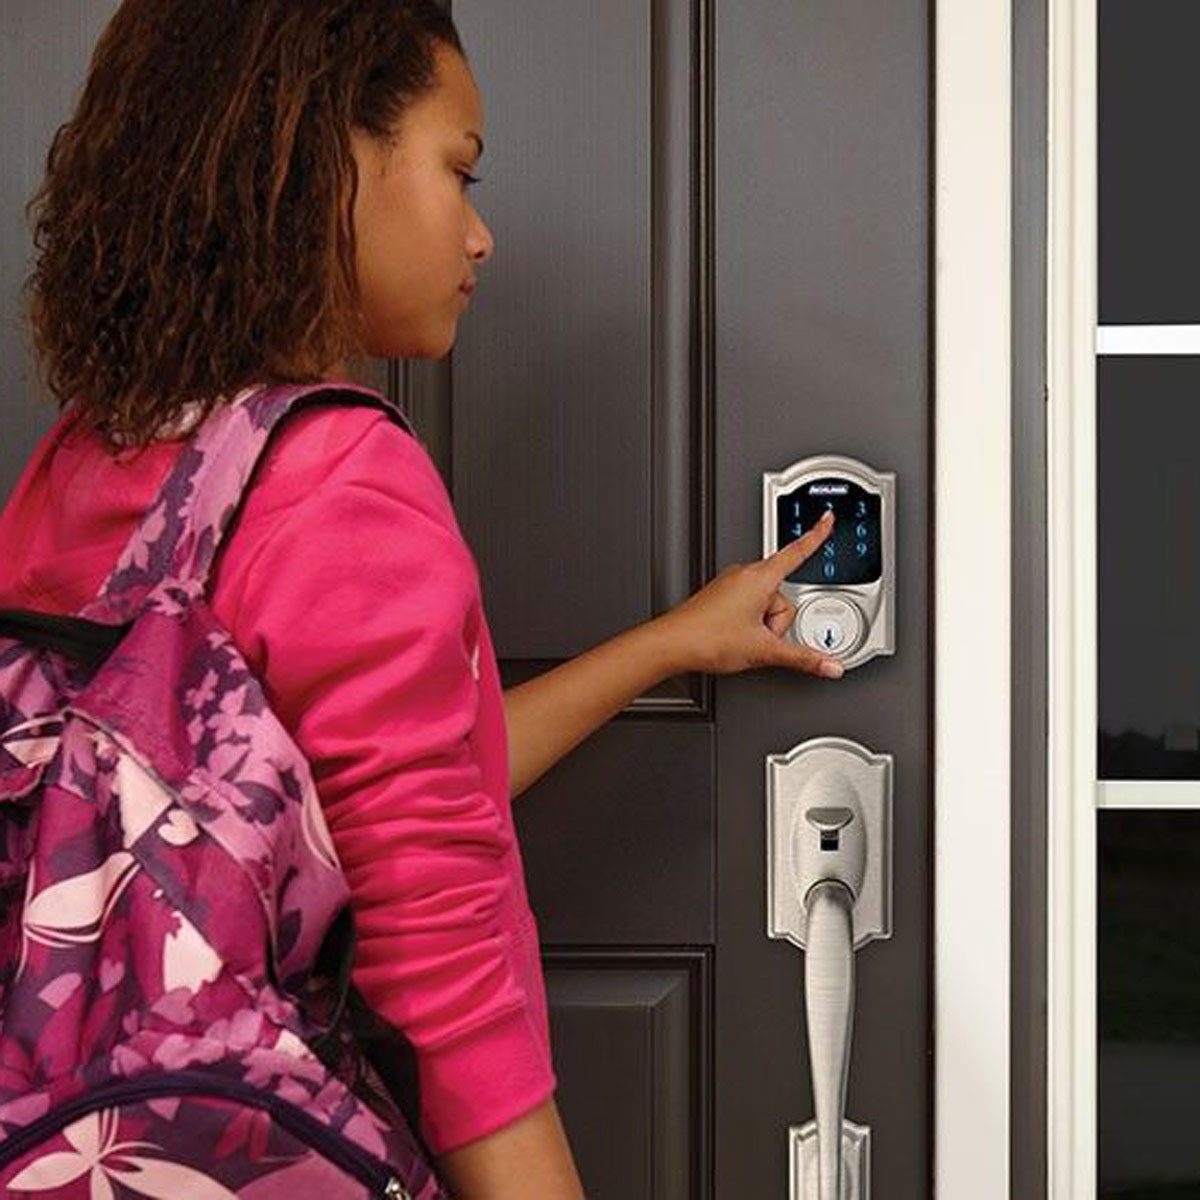 What is a smart lock and how does it work?